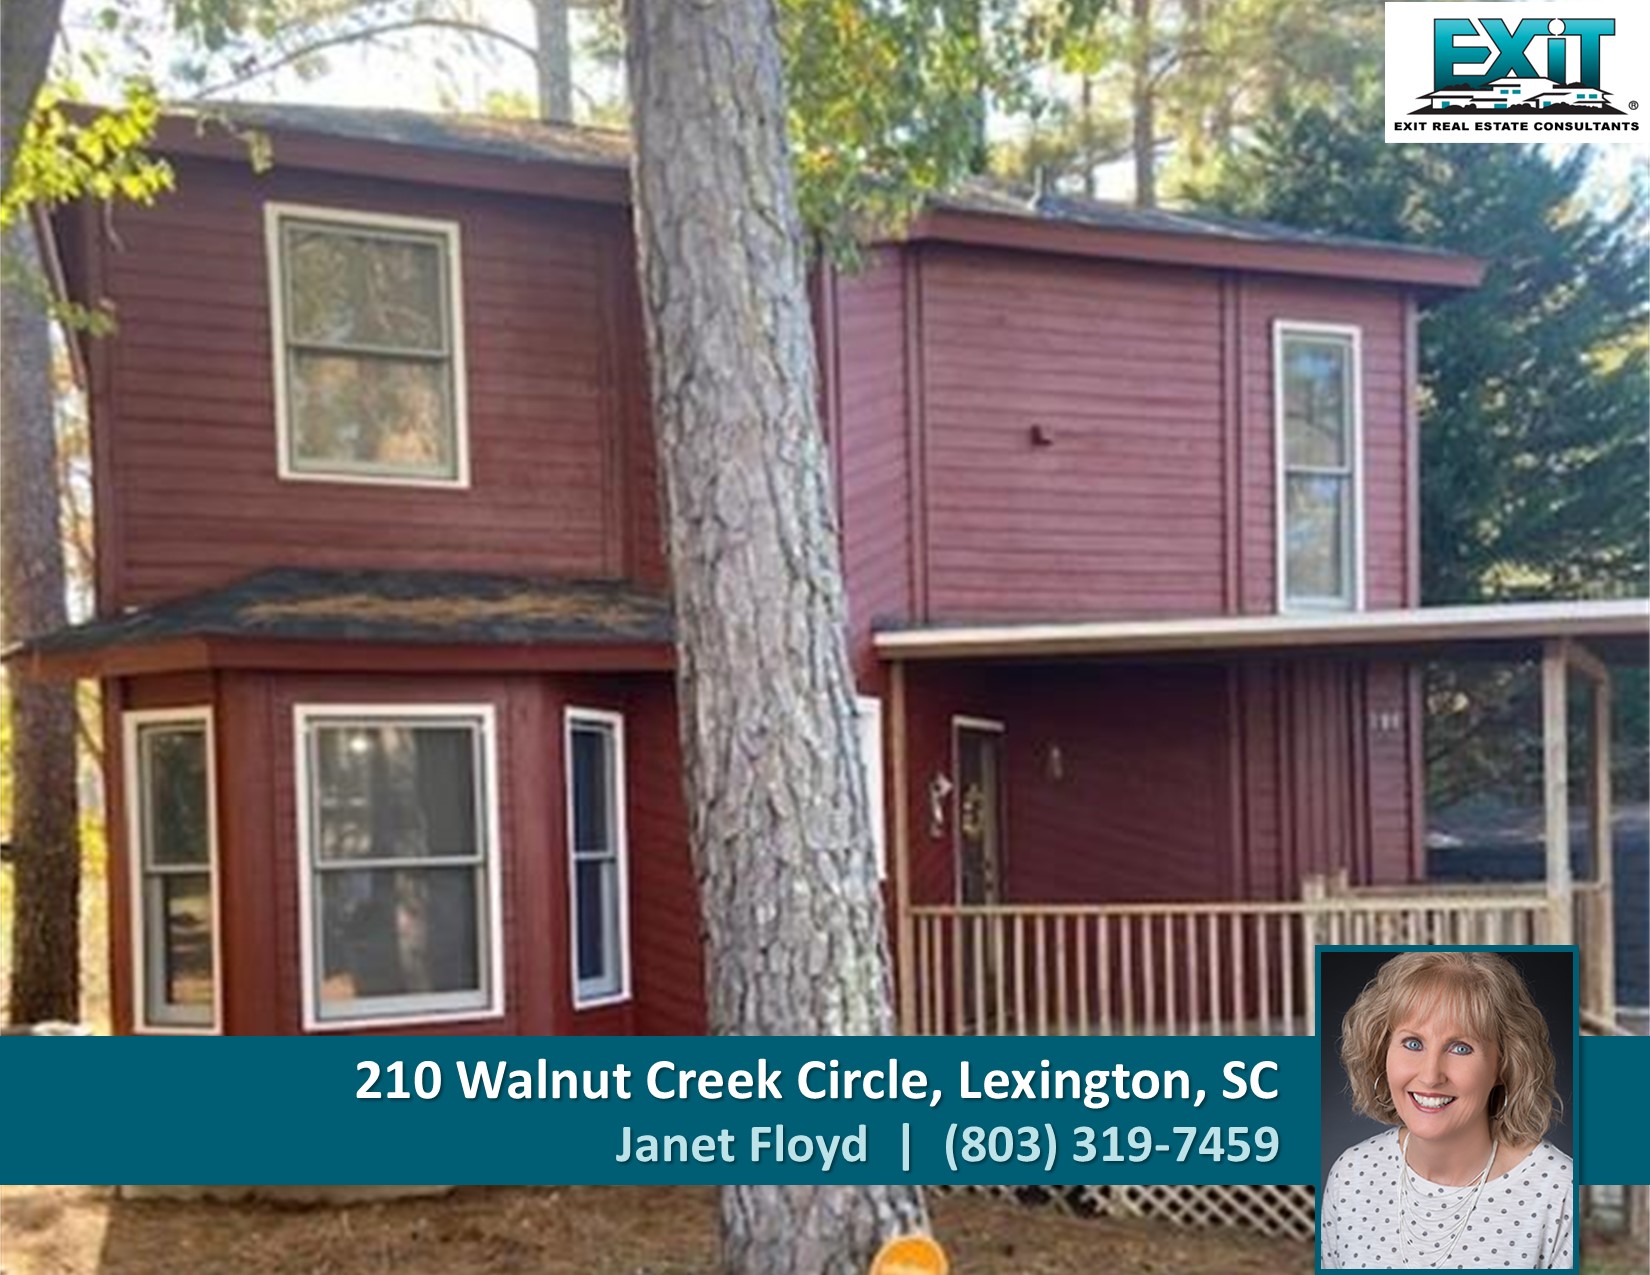 Just listed in Walnut Creek